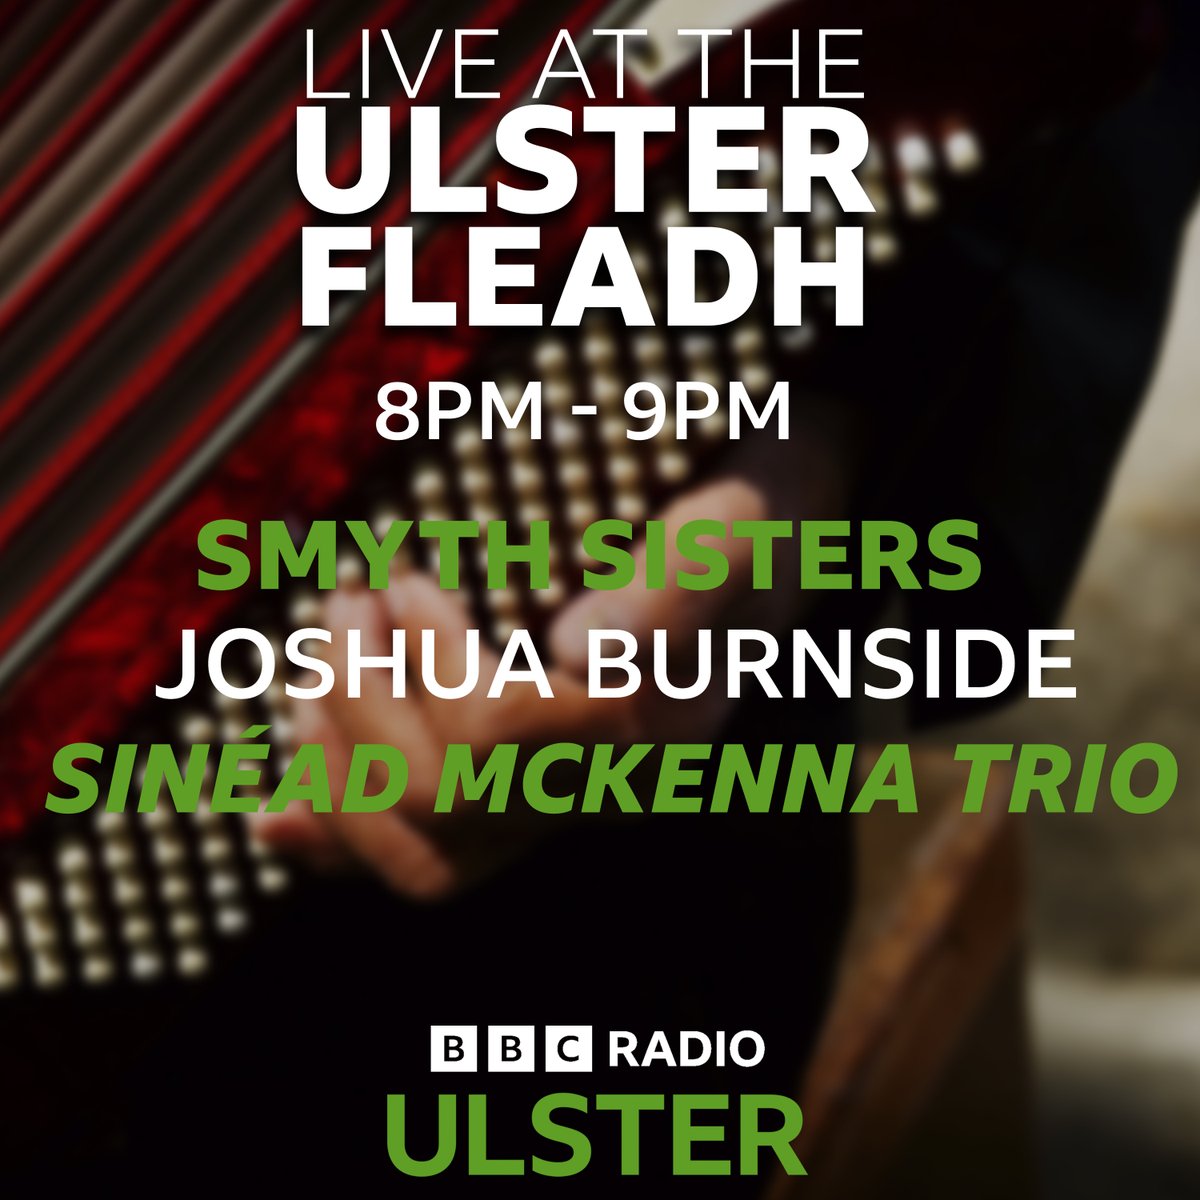 The craic continues on Live at The Ulster Fleadh! Listen now on BBC Radio Ulster and BBC Sounds 🎻 Check out who's coming up this hour 🎶 @LynetteFay @StephenMainline @c_ni_c @JoshuaBurnside